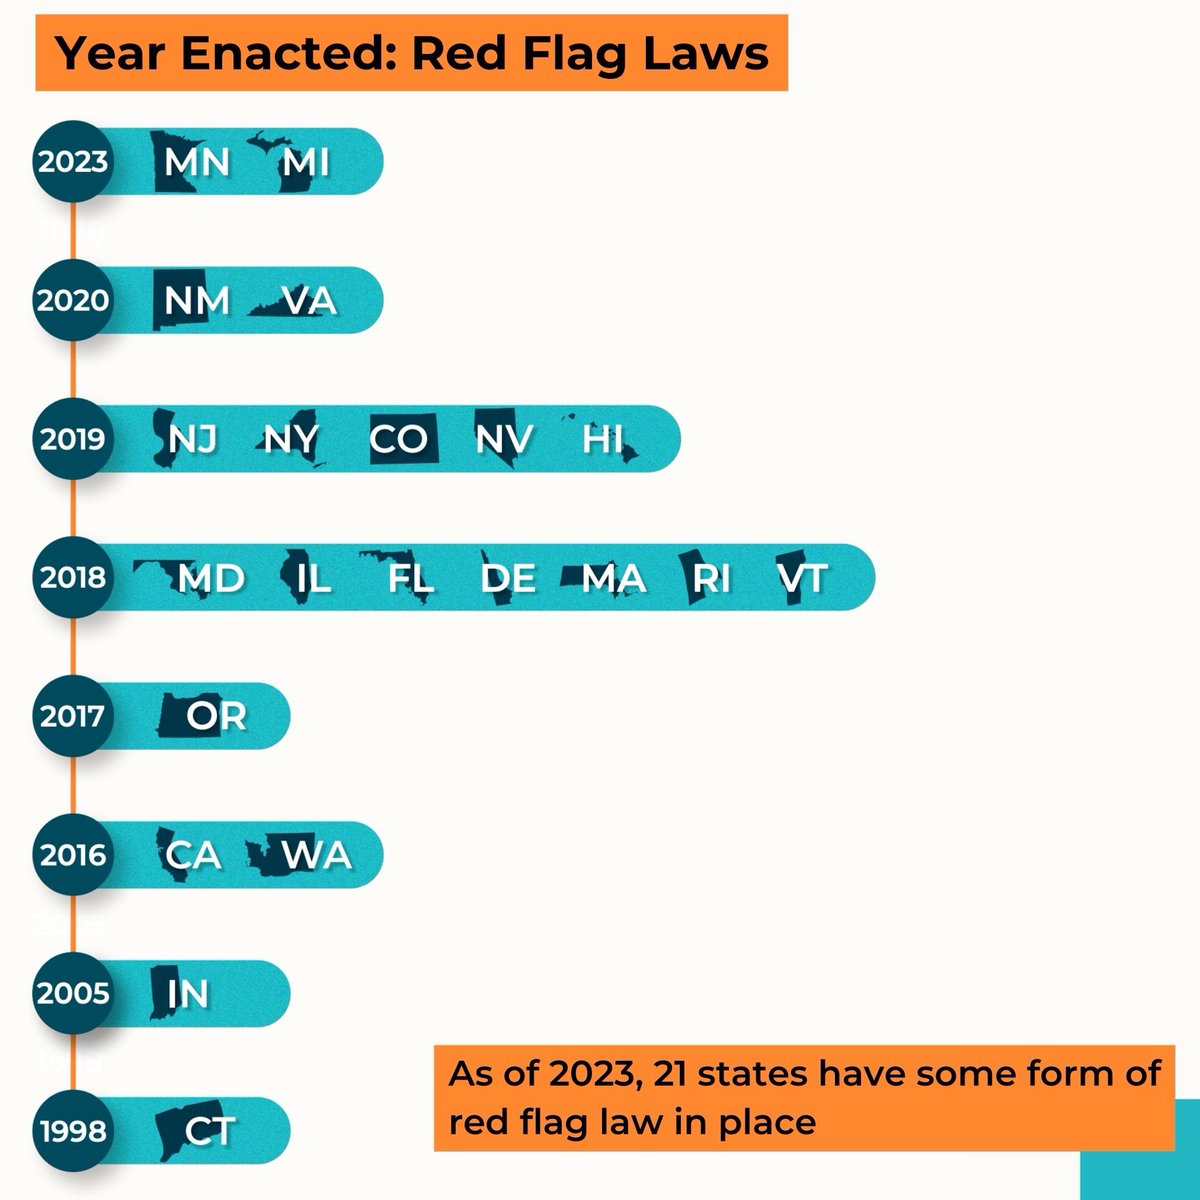 Let’s talk about red flag laws…🧵 Red flag laws or ERPOs are used to temporarily remove firearms from people who pose a risk of harm to themselves or others. They’ve been enacted in 21 states.